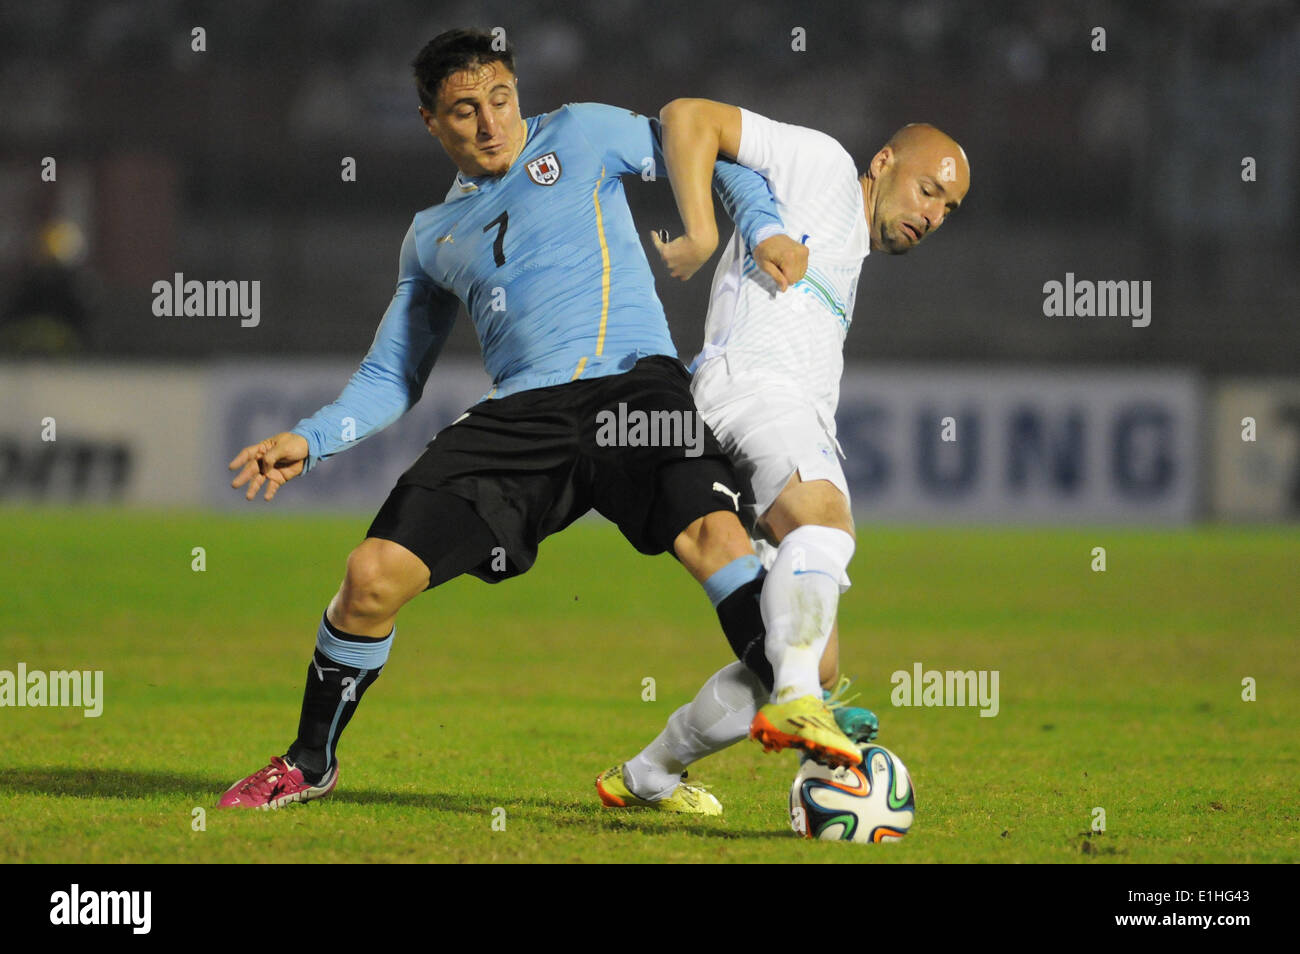 Montevideo, Uruguay. 4th June, 2014. Uruguay's Cristian Rodriguez (L) vies for the ball with Slovenia's Miso Brecko during a friendly match prior to the 2014 FIFA World Cup, held at the Centenario Stadium, in Montevideo, capital of Uruguay, on June 4, 2014. © Nicolas Celaya/Xinhua/Alamy Live News Stock Photo